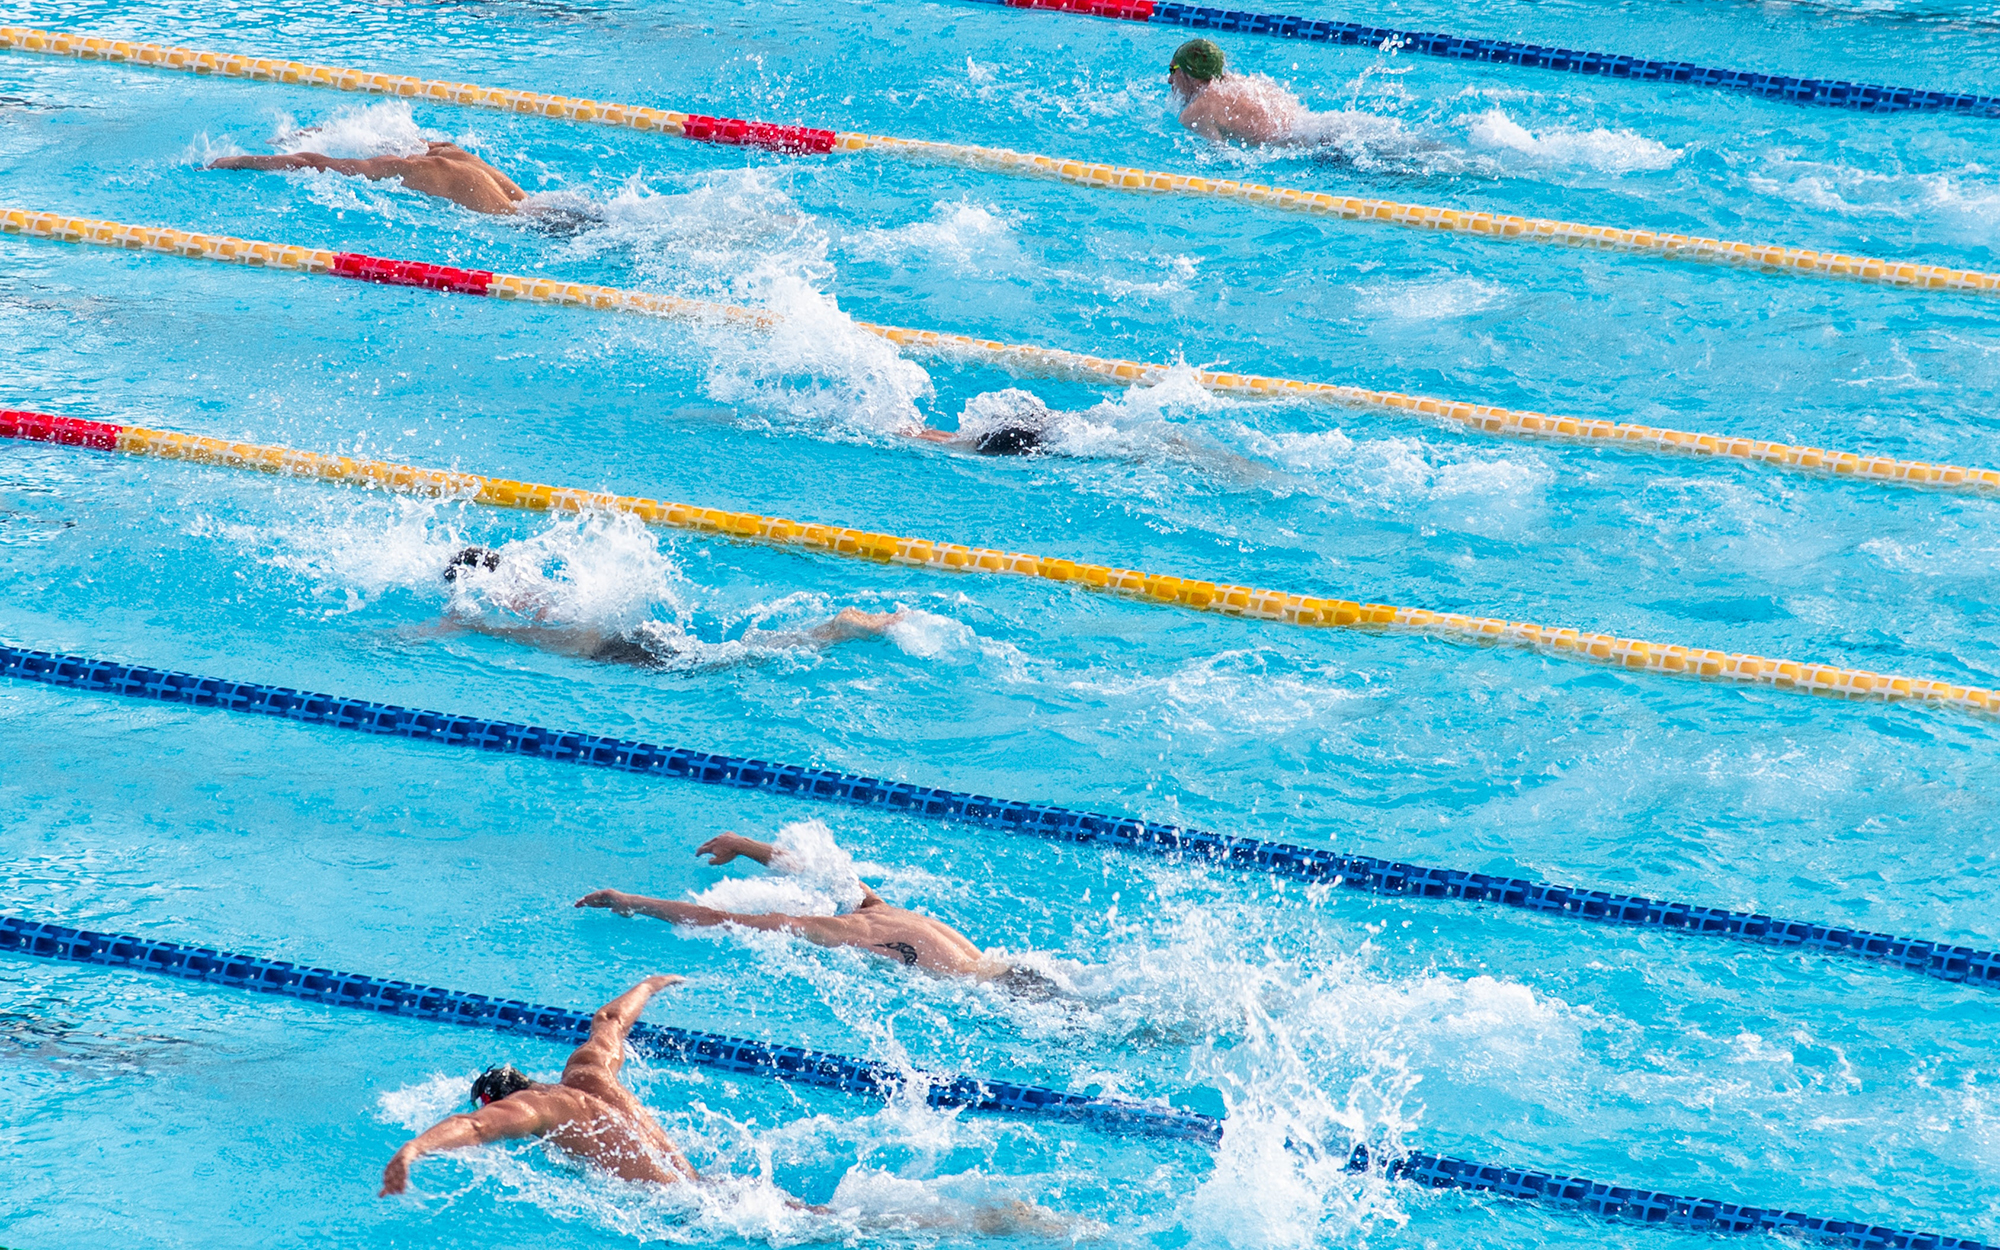 competitive swimmers during an event